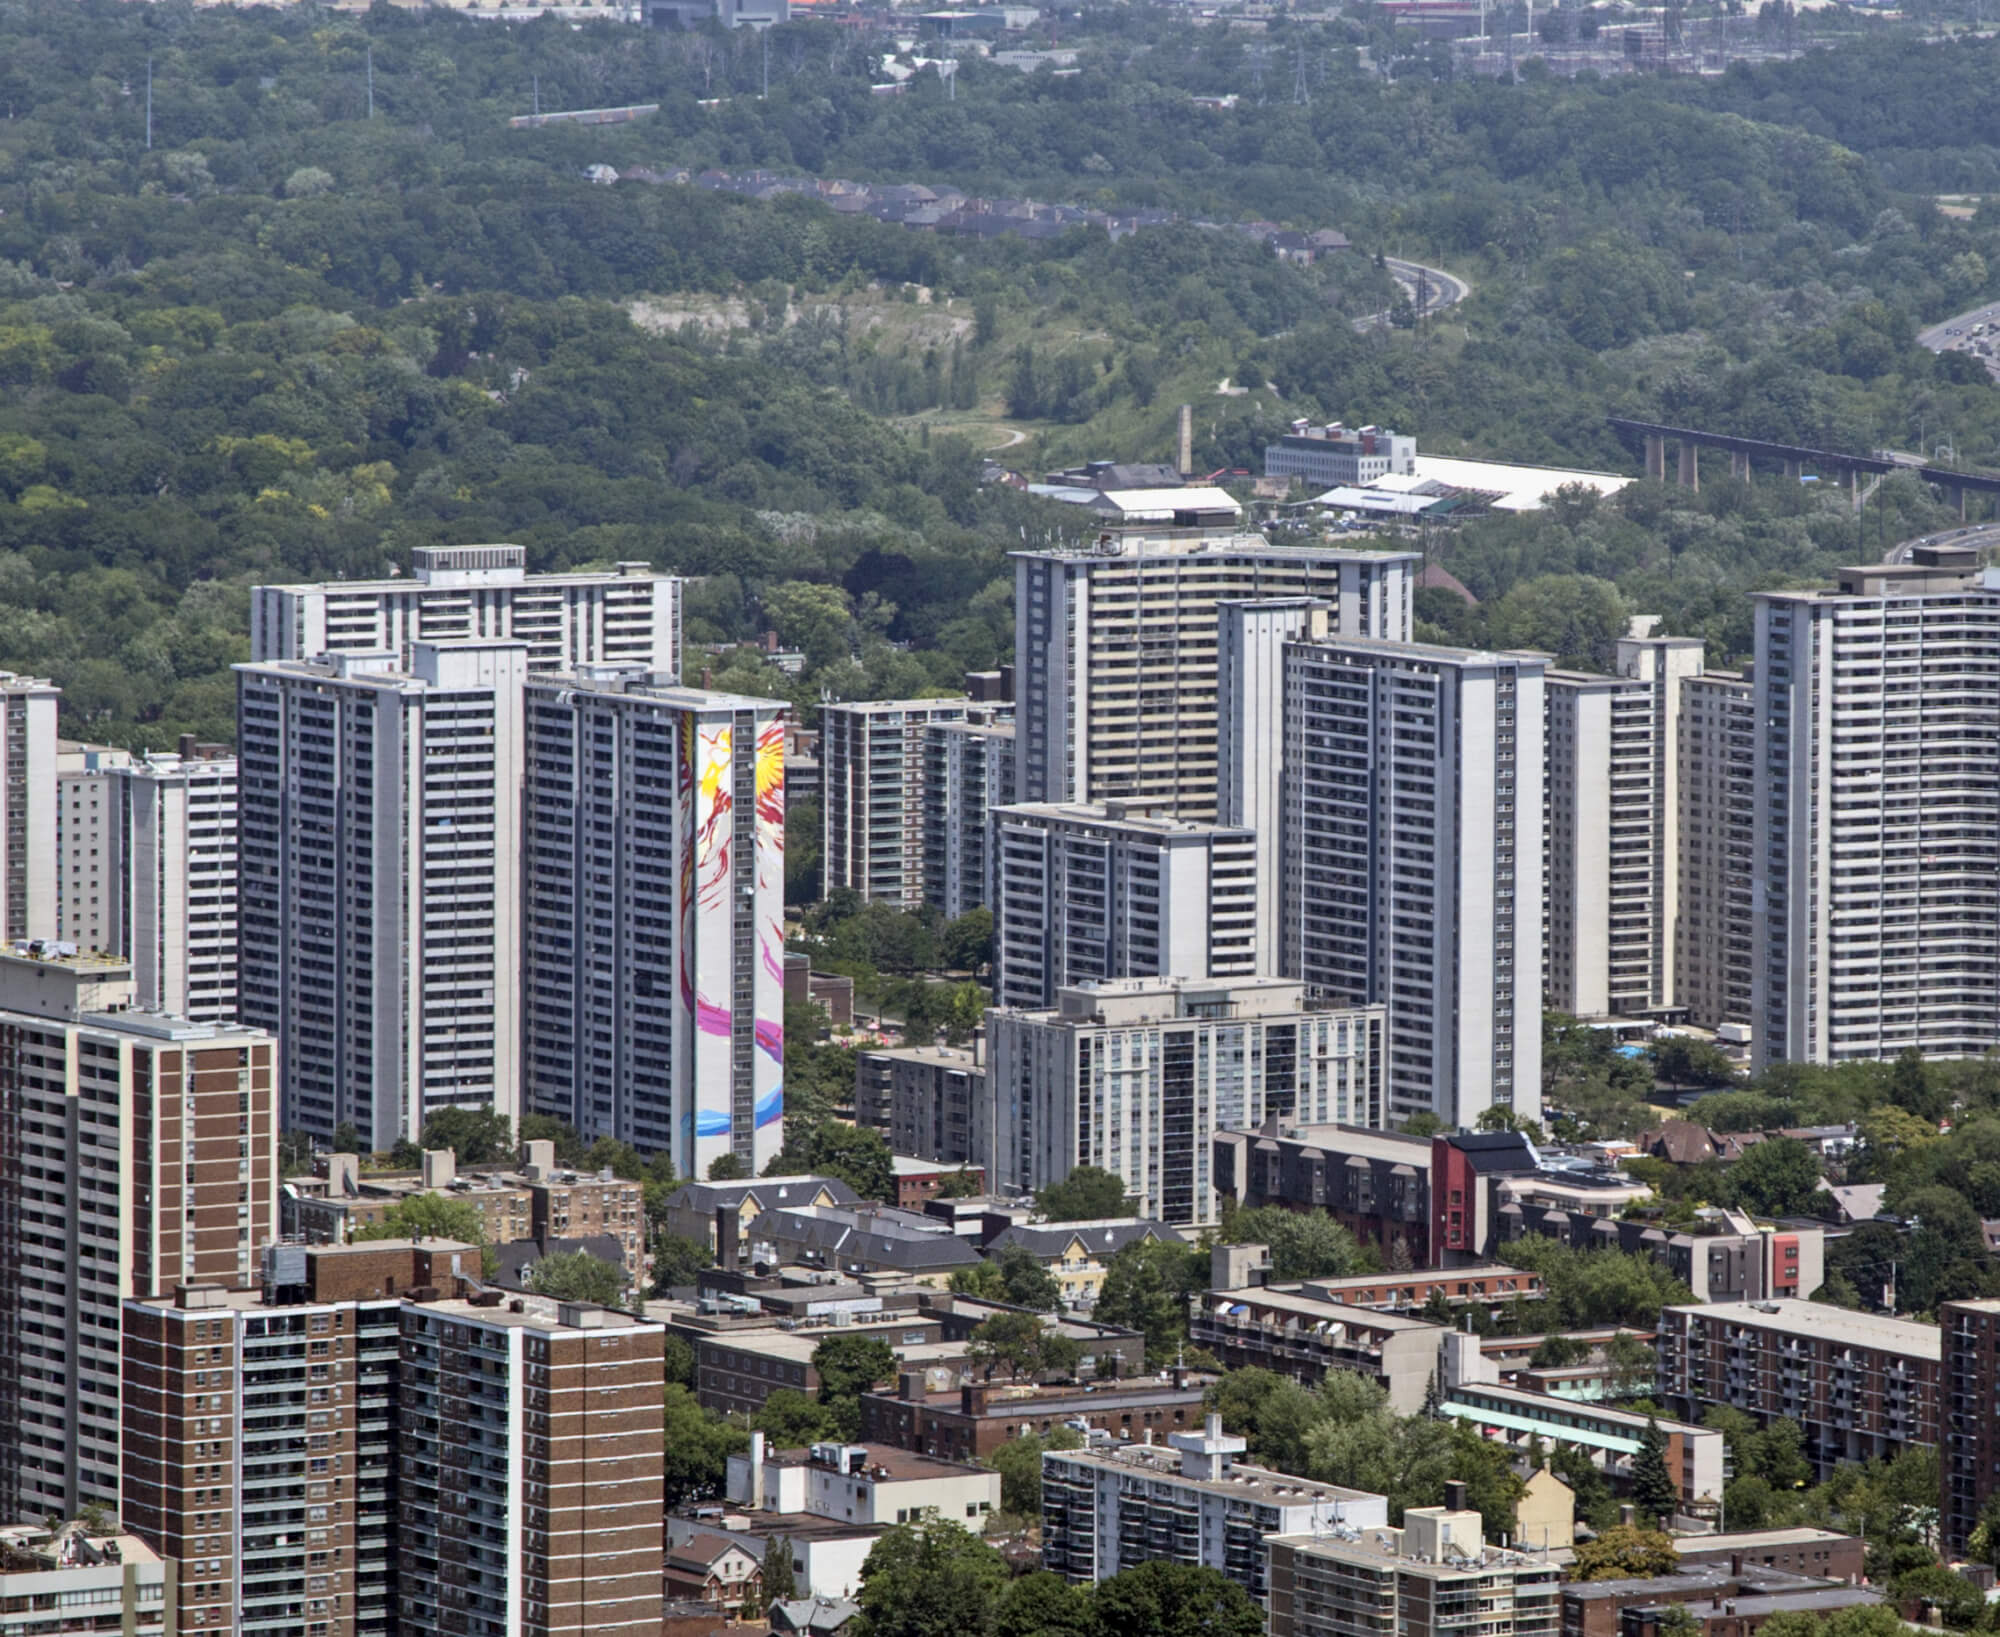 Colour aerial photograph of a cityscape with many tall residential buildings and complexes. Trees are visible in the background.